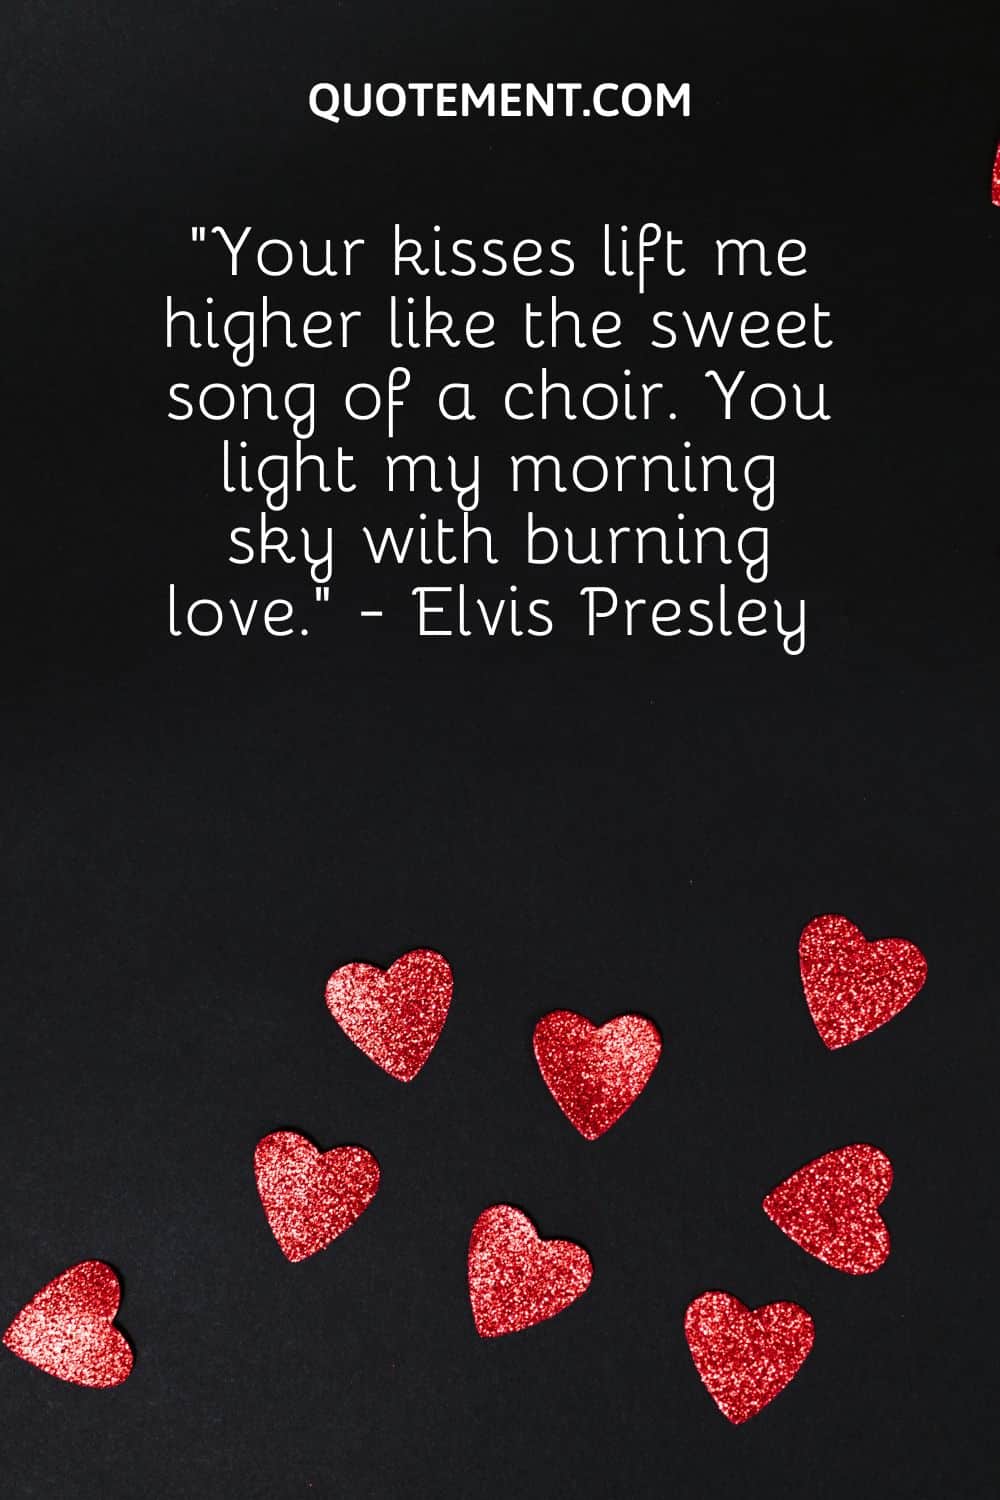 Your kisses lift me higher like the sweet song of a choir. You light my morning sky with burning love. - Elvis Presley 